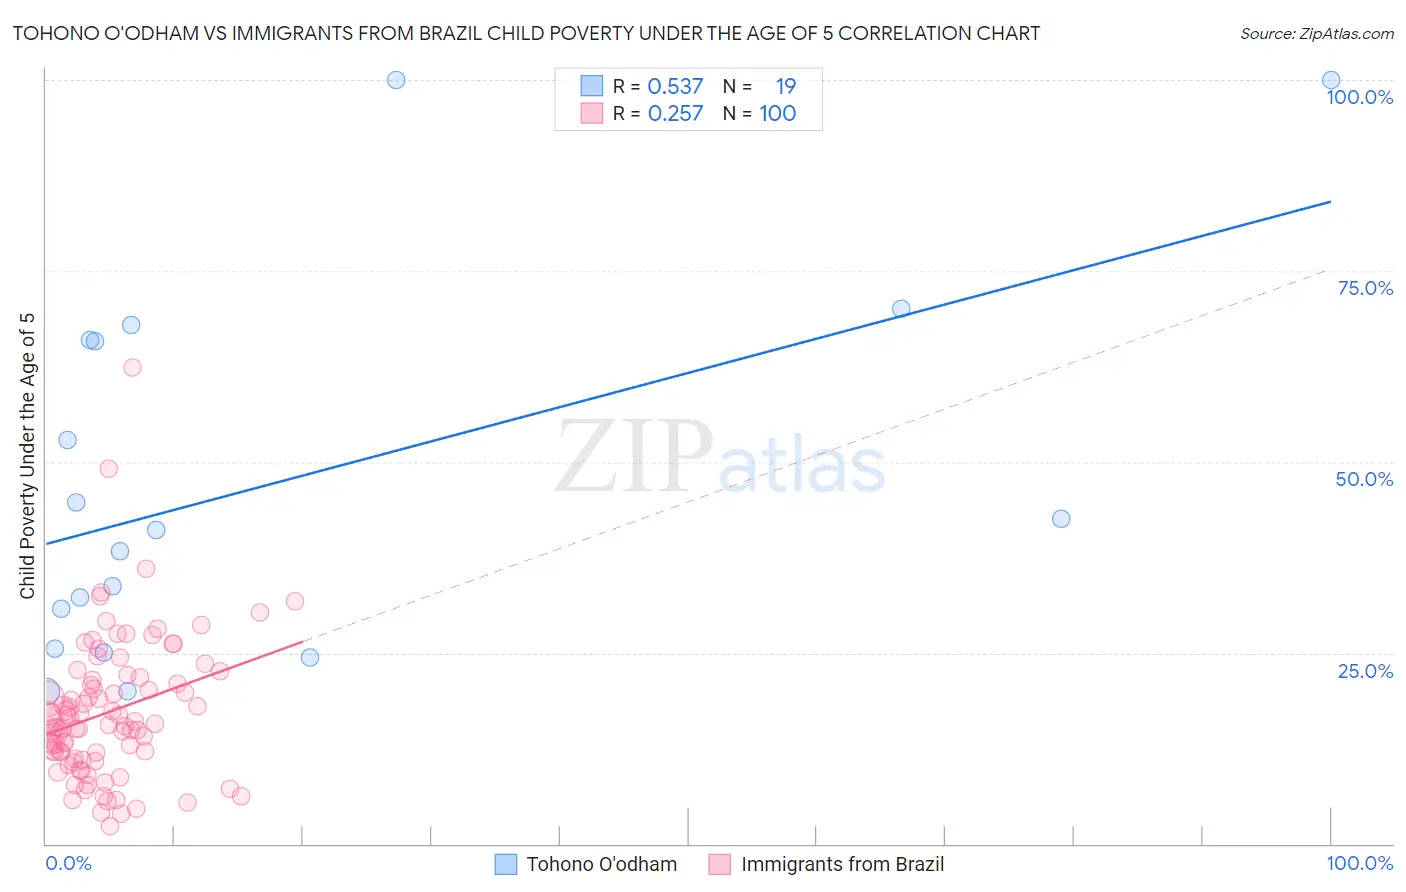 Tohono O'odham vs Immigrants from Brazil Child Poverty Under the Age of 5